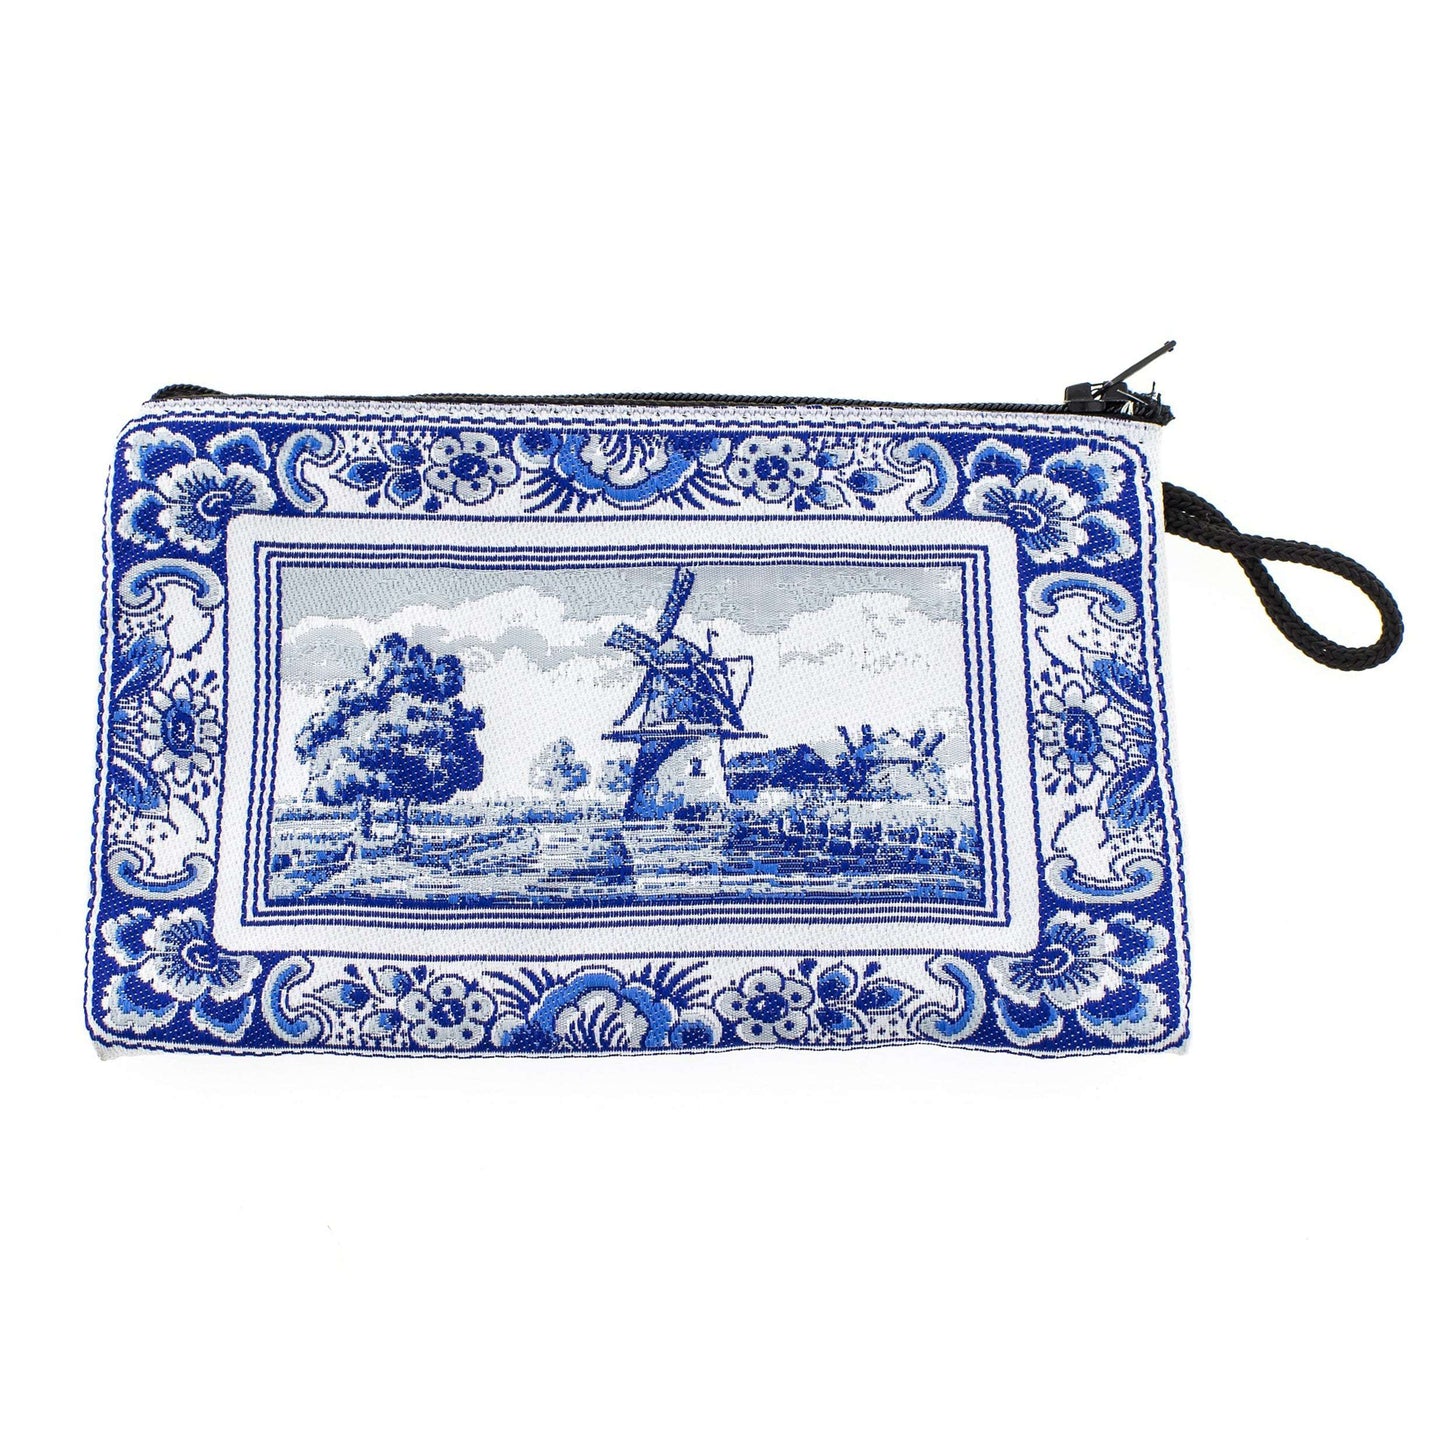 Delft Blue, Woven Bag with a Windmill, Small